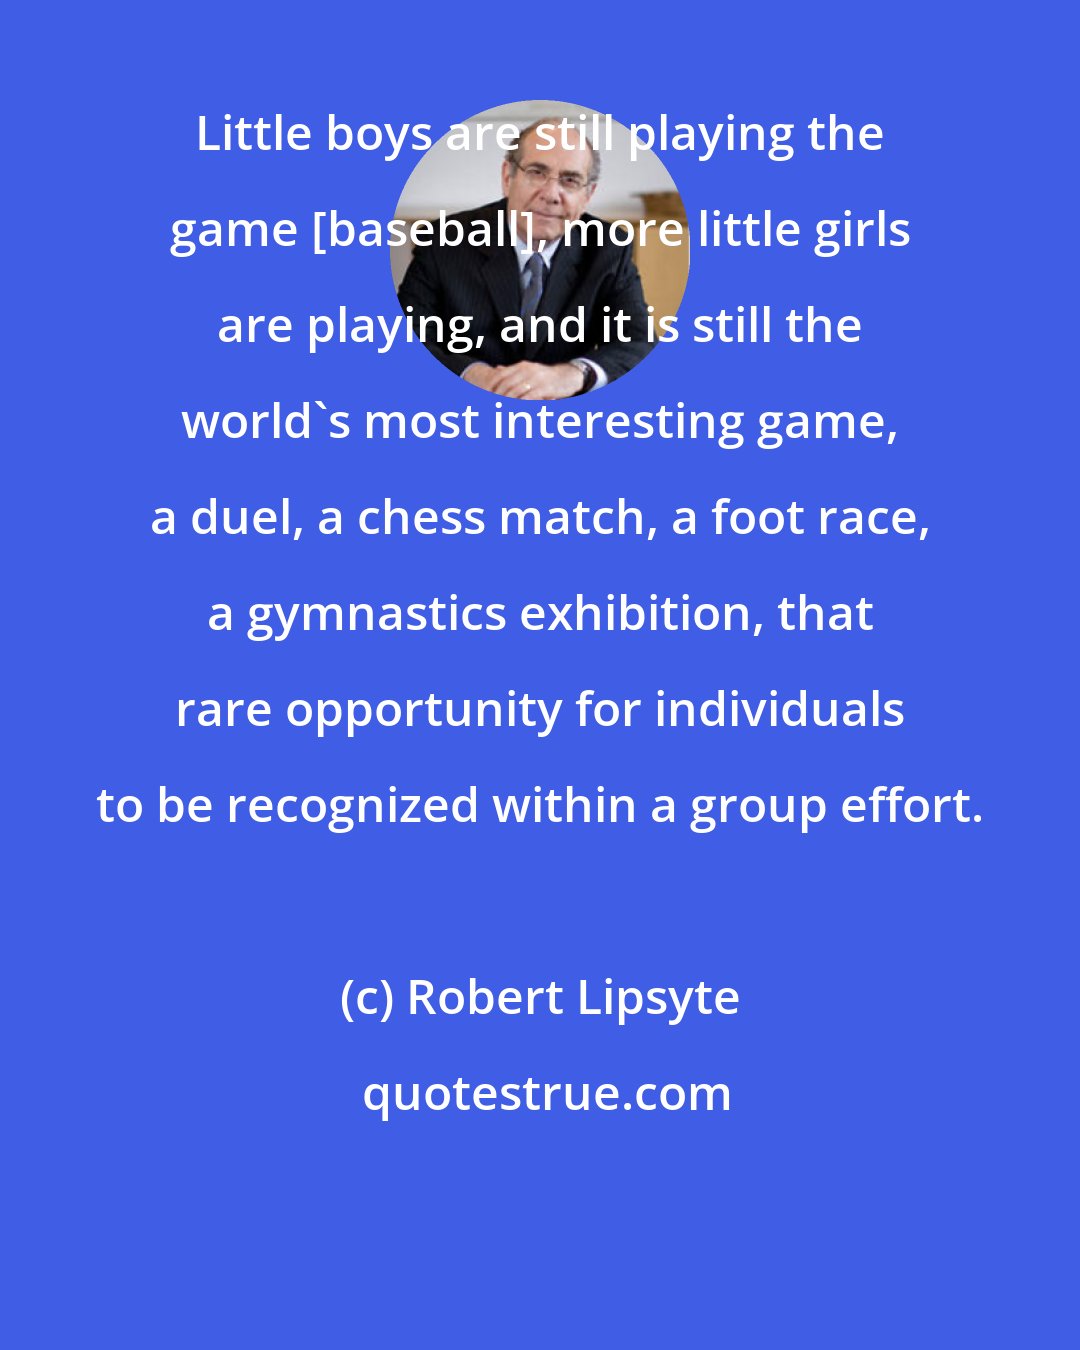 Robert Lipsyte: Little boys are still playing the game [baseball], more little girls are playing, and it is still the world's most interesting game, a duel, a chess match, a foot race, a gymnastics exhibition, that rare opportunity for individuals to be recognized within a group effort.